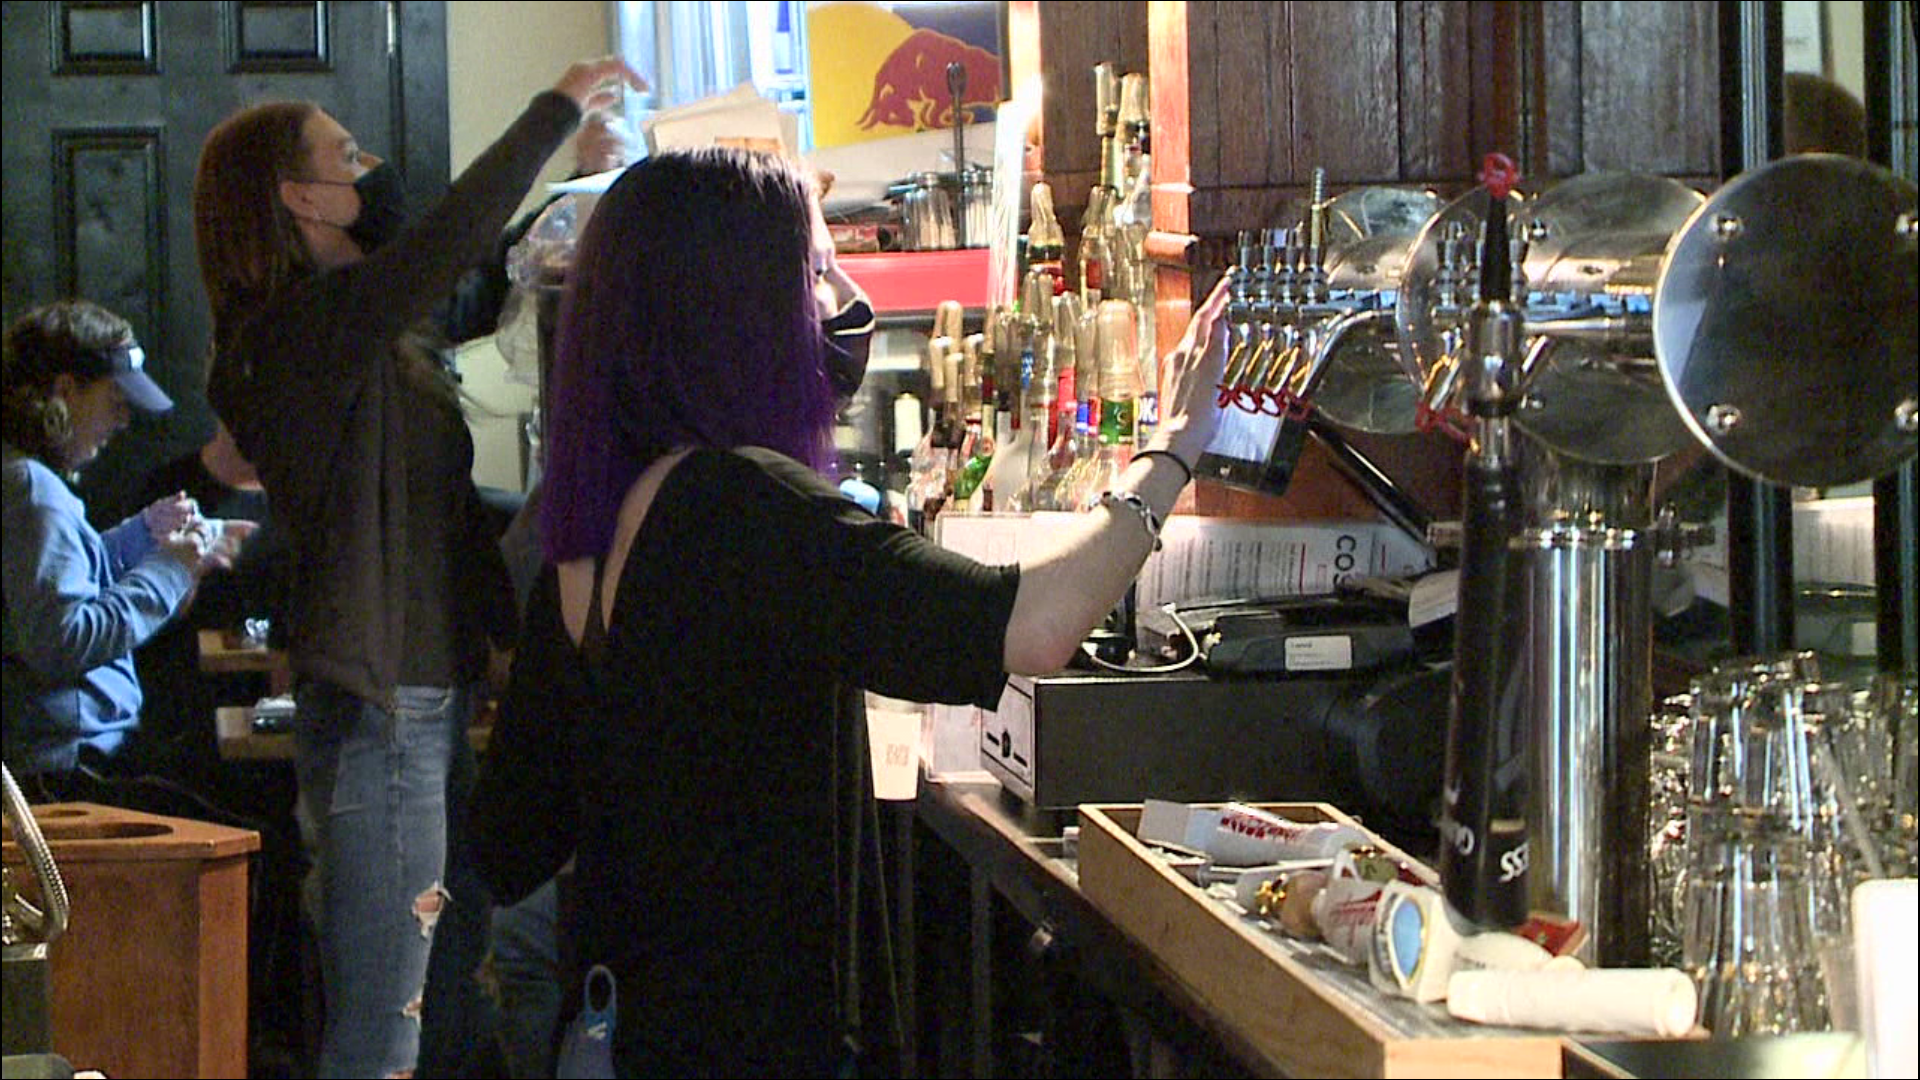 Bars and restaurants will be able to host larger groups come Easter Sunday, but only if they have enough employees.